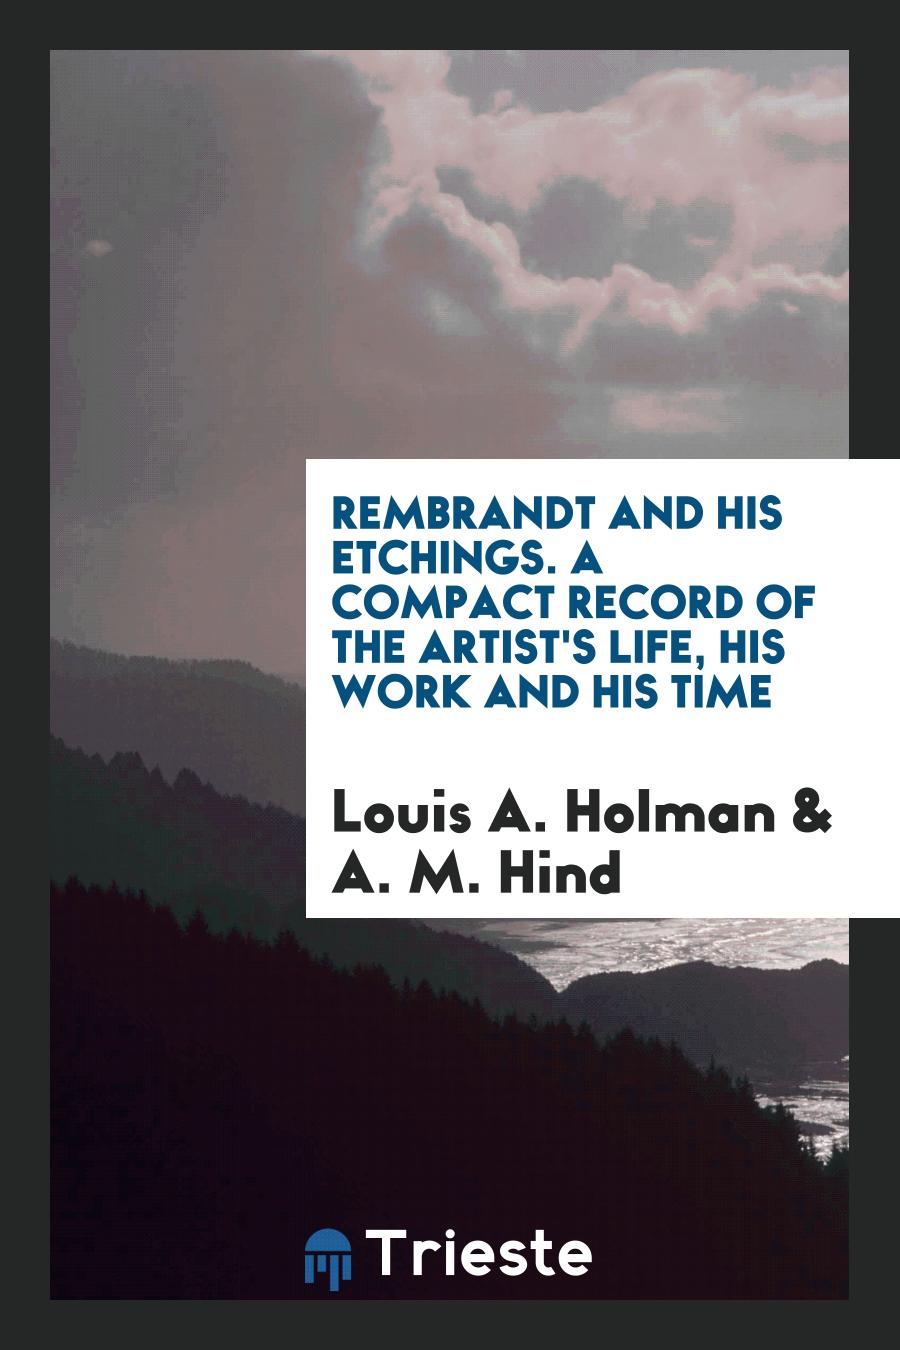 Rembrandt and his etchings. A compact record of the artist's life, his work and his time